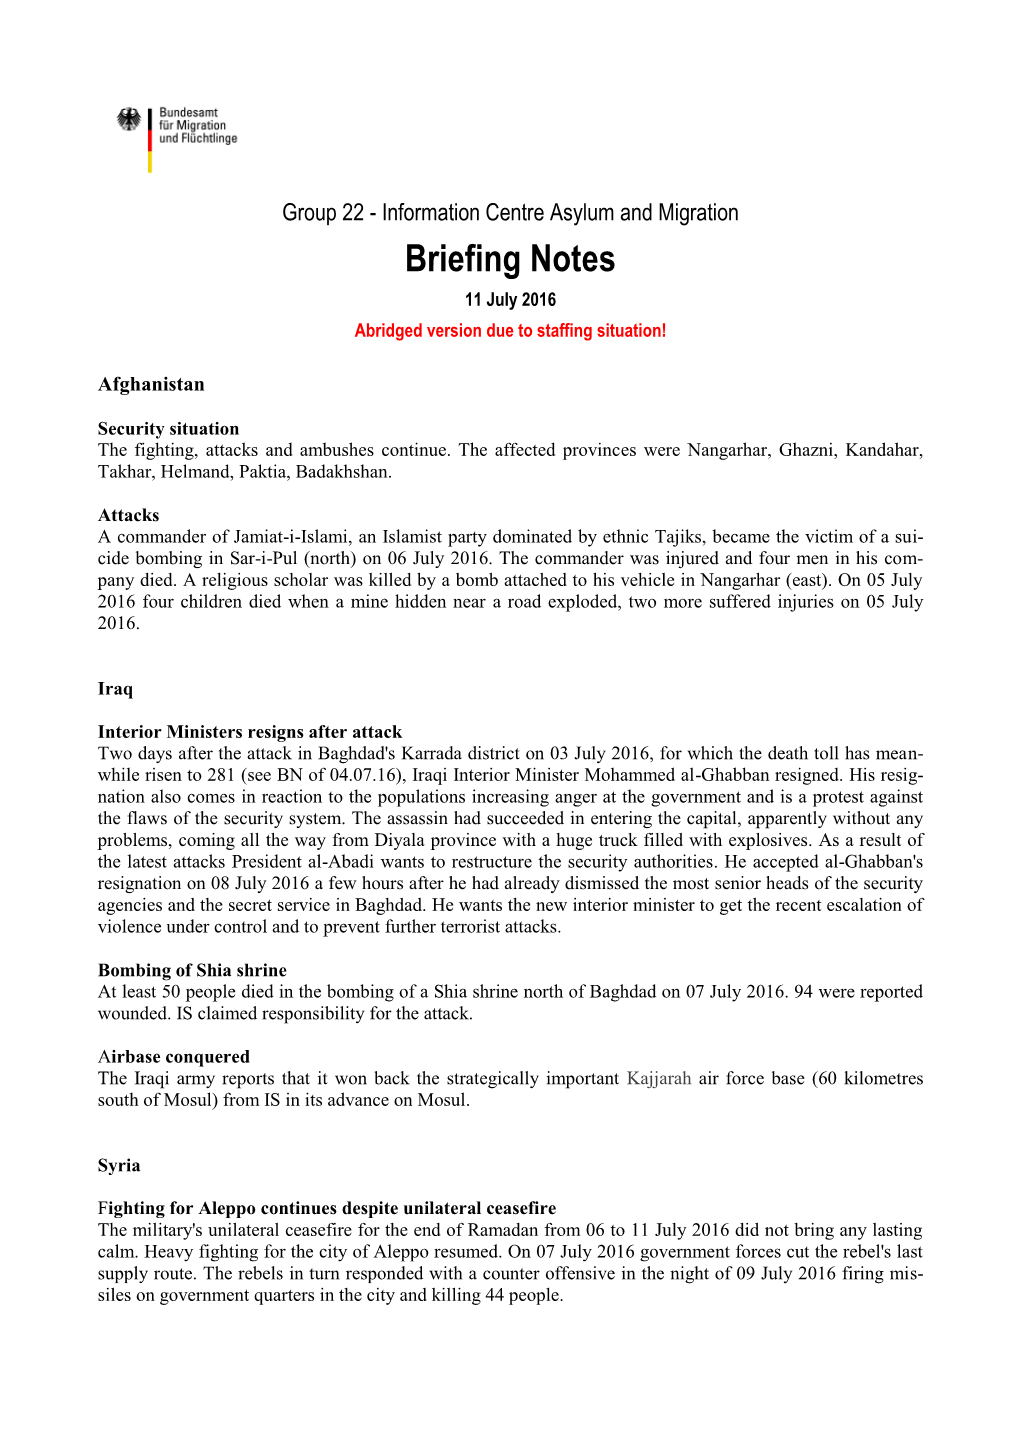 Briefing Notes 11 July 2016 Abridged Version Due to Staffing Situation!